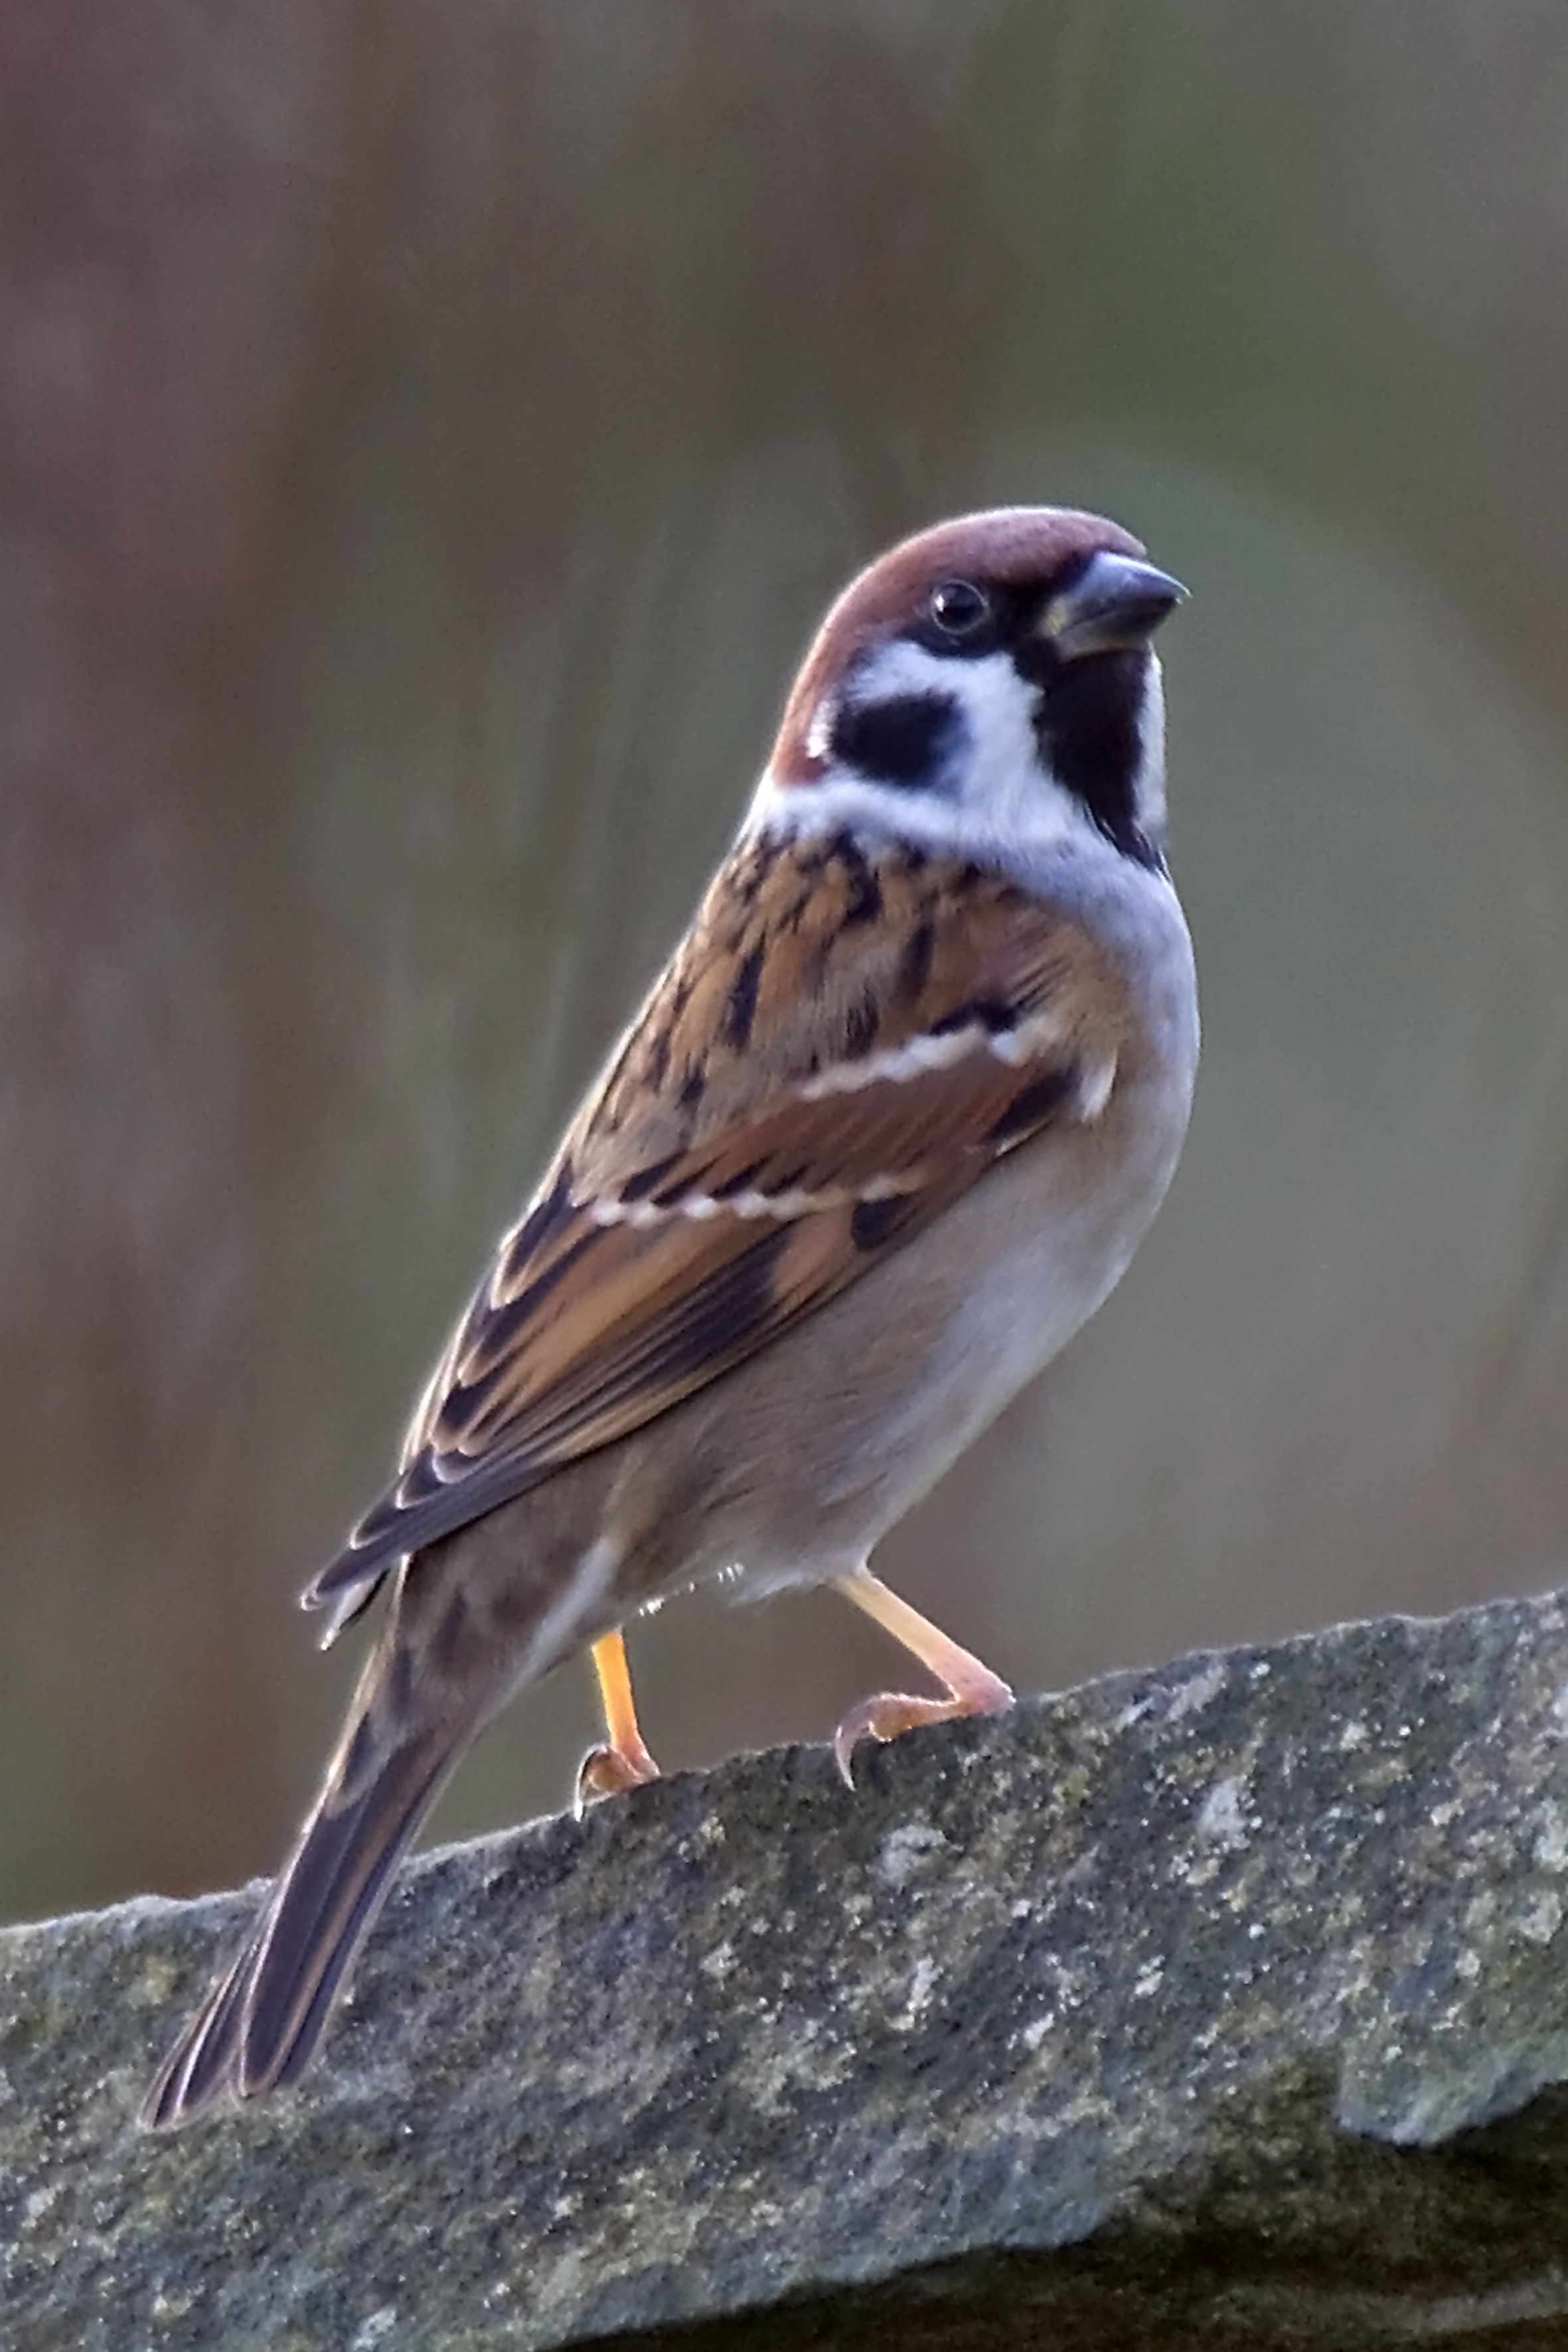 Eurasian Tree Sparrow (I've seen this also misidentified as an ...